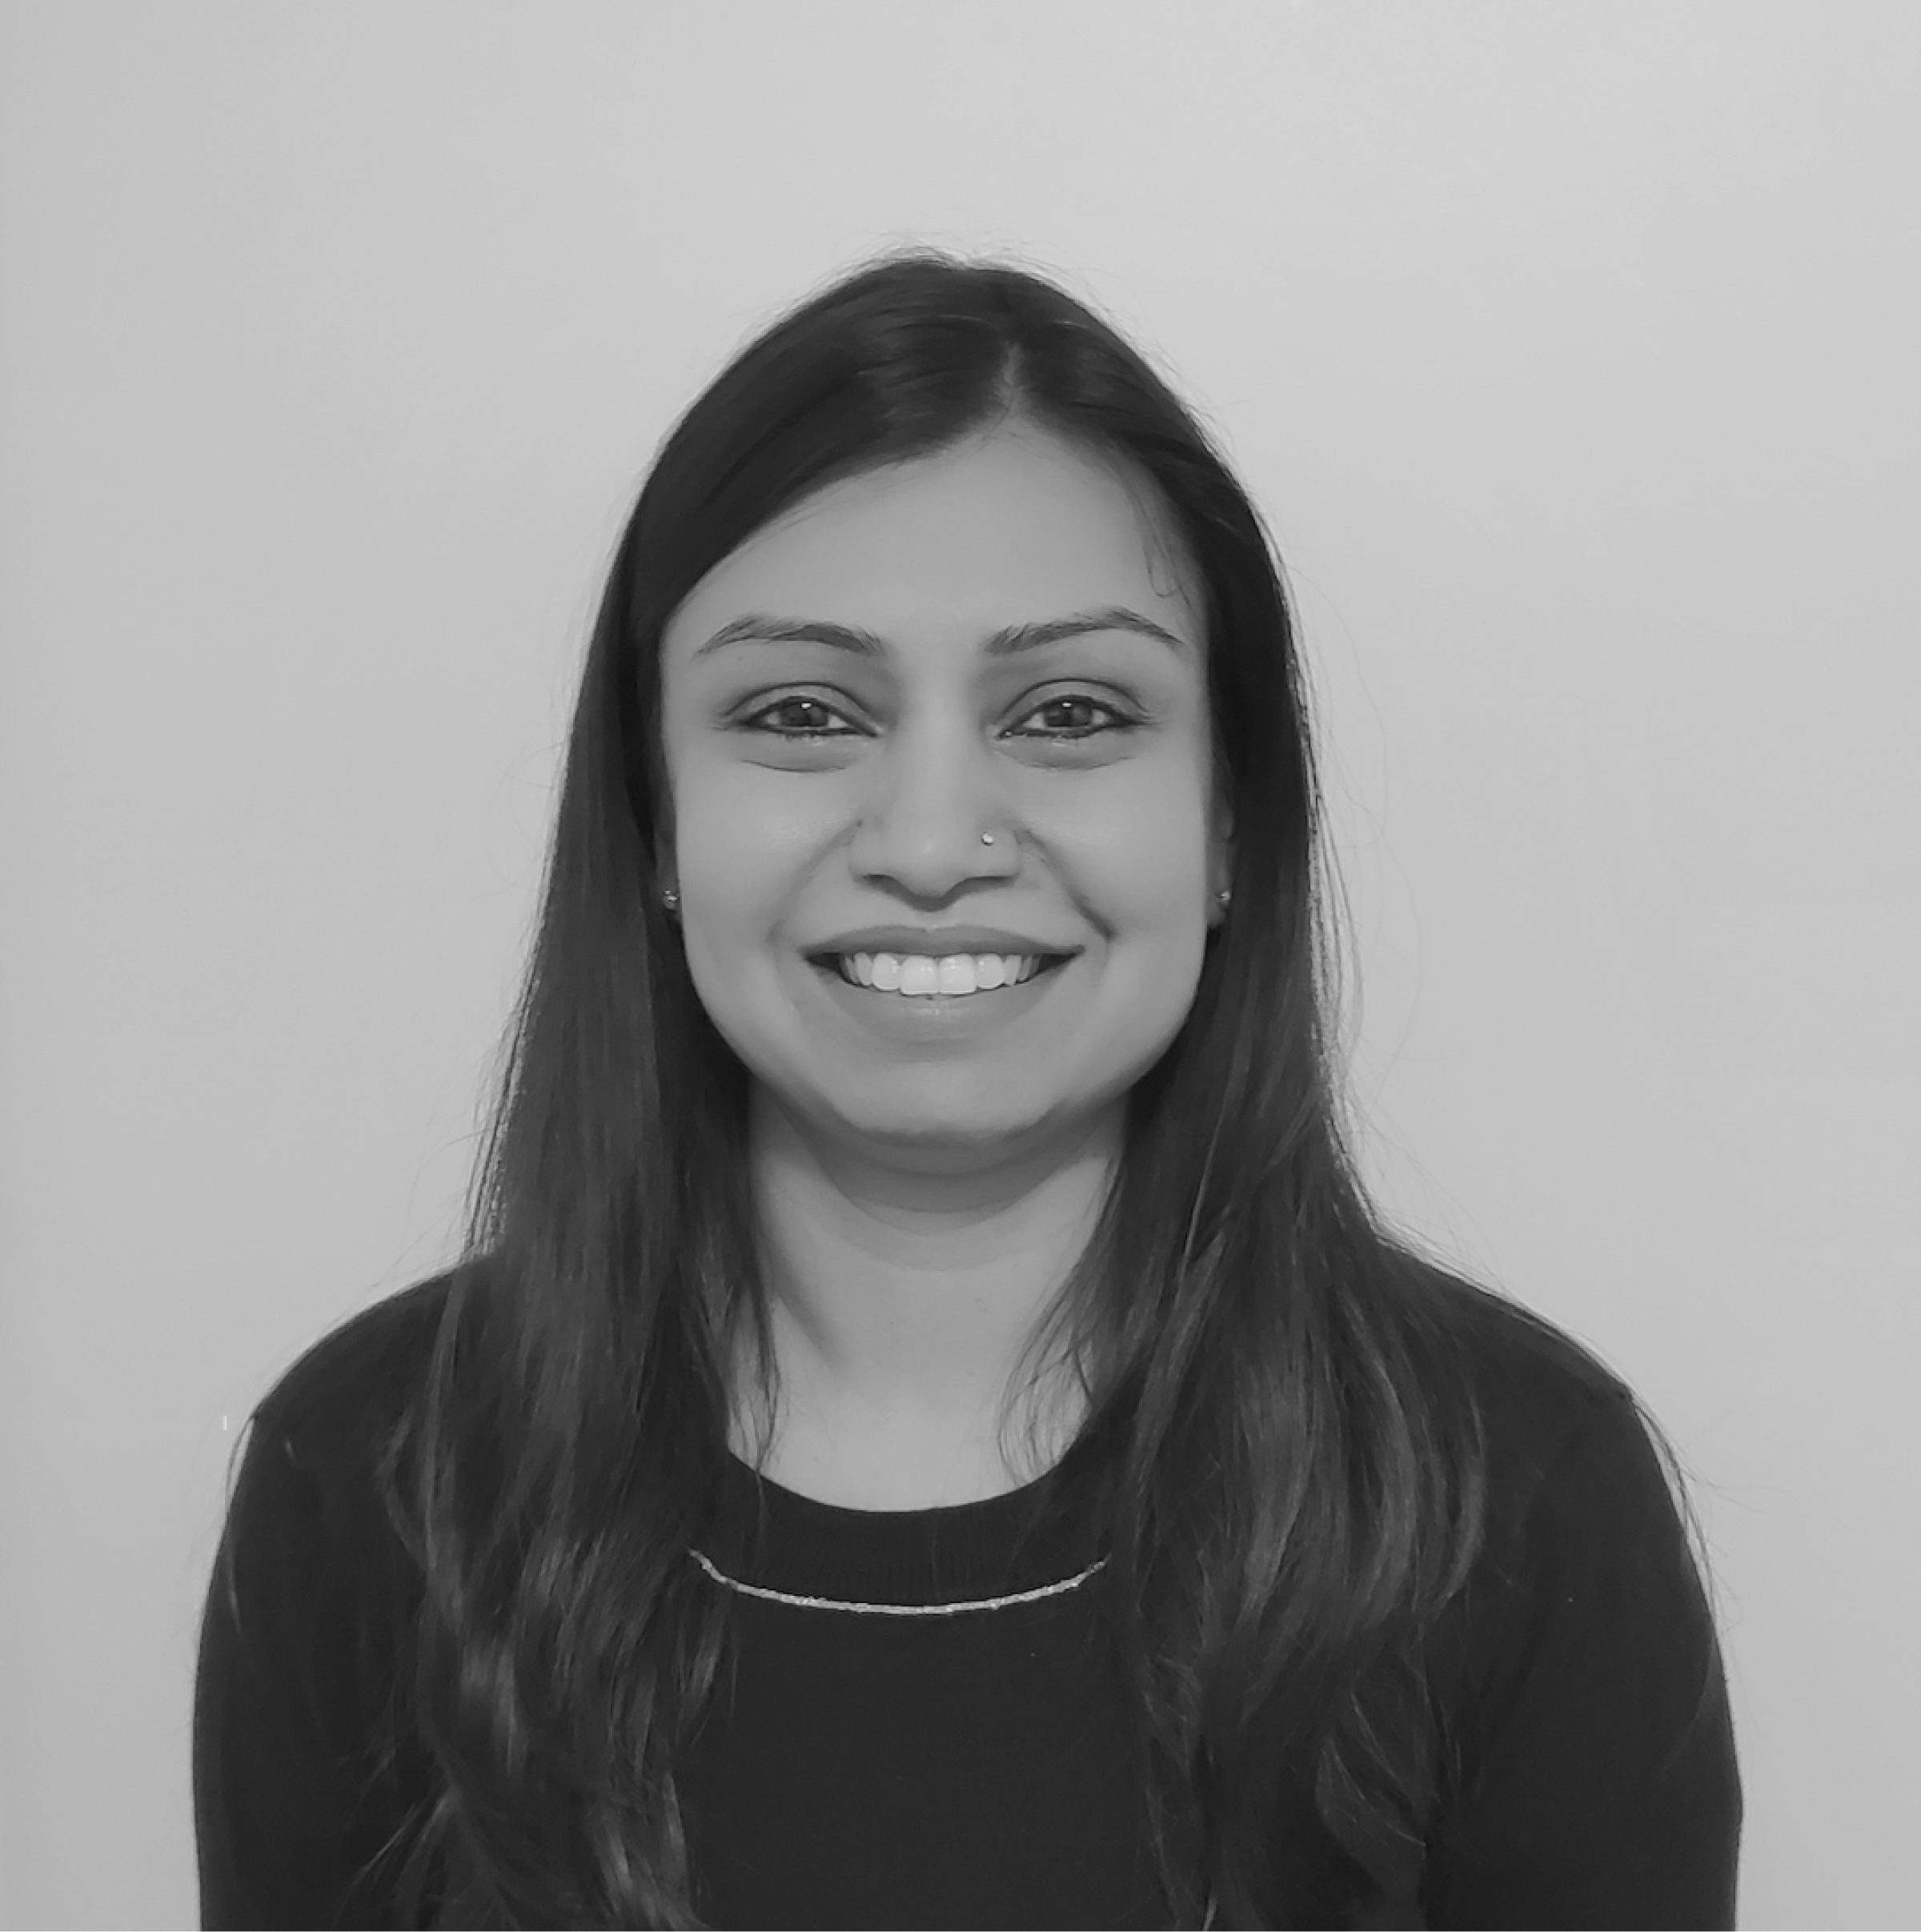 Rachita Jain has a big smile on her face and long dark hair. Rachita is our Indian recruiter based in Toronto and the image of her is in black and white.